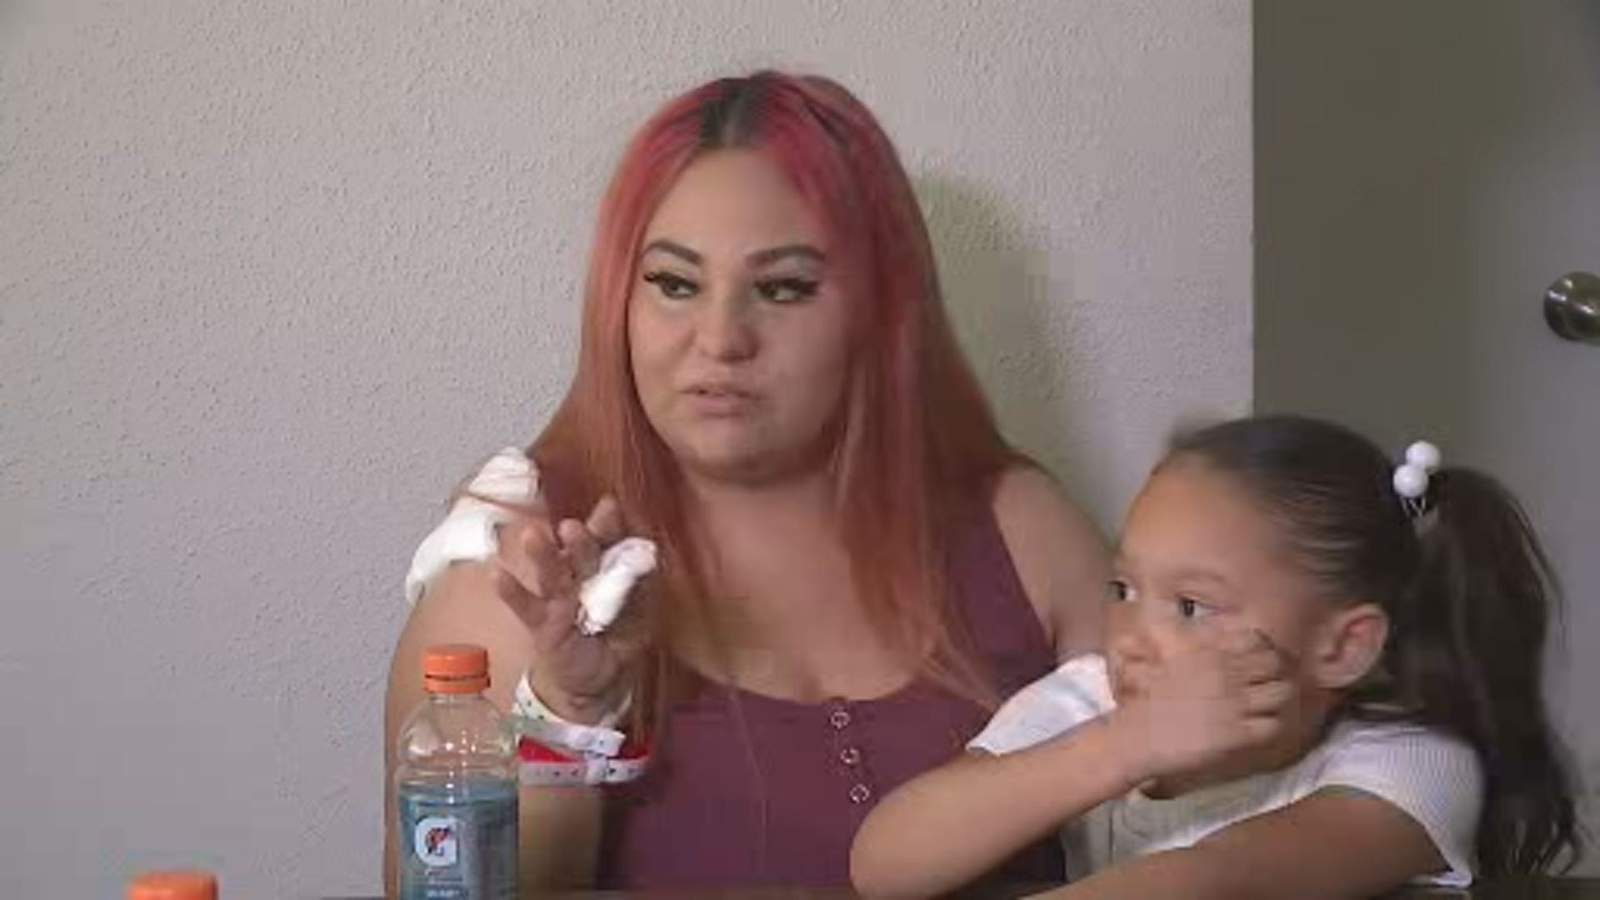 Woman, 8-year-old autistic son shot in suspected road rage incident near Gulf Freeway